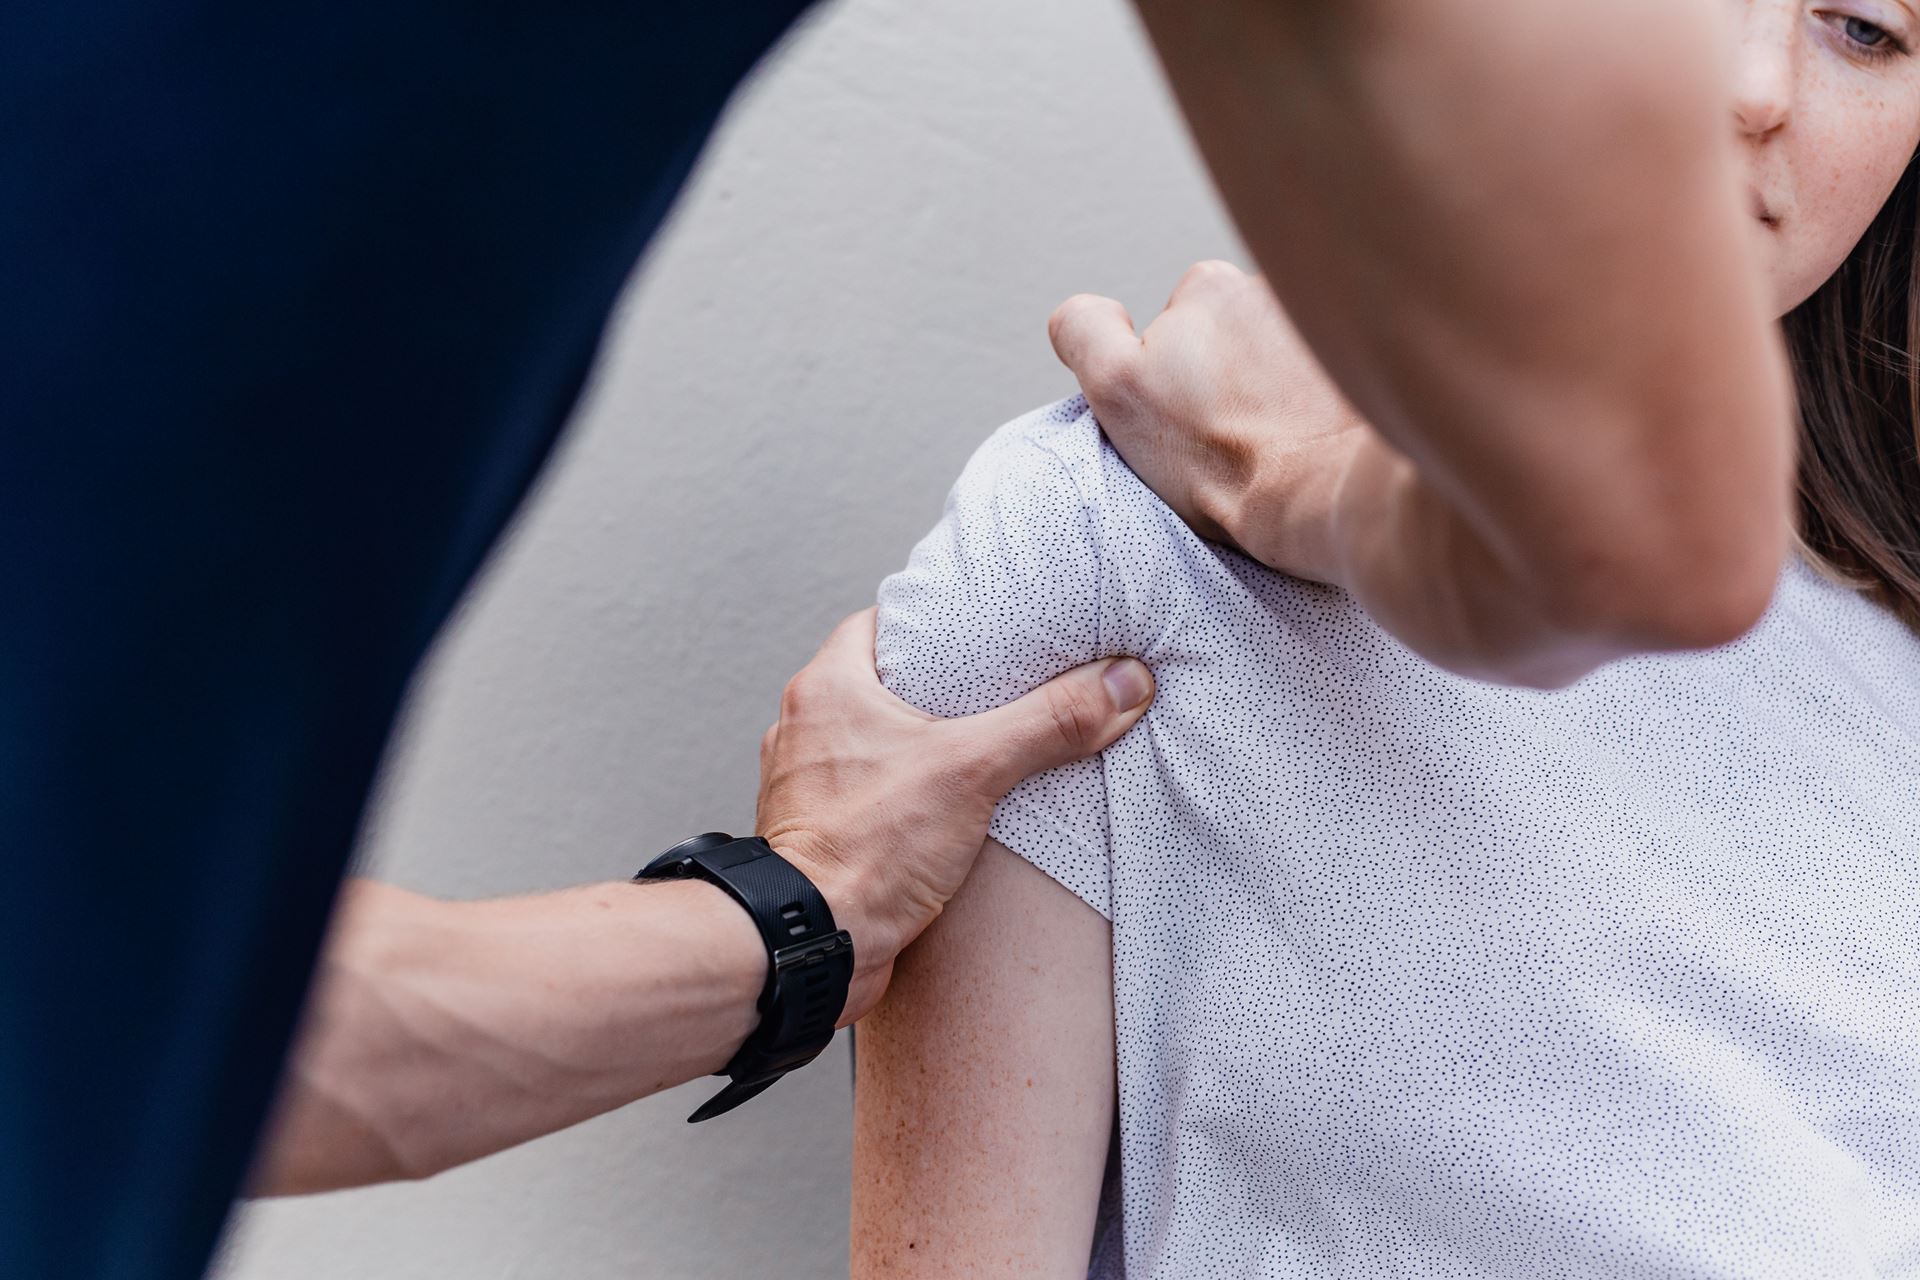 A physiotherapist manipulating a woman's shoulder